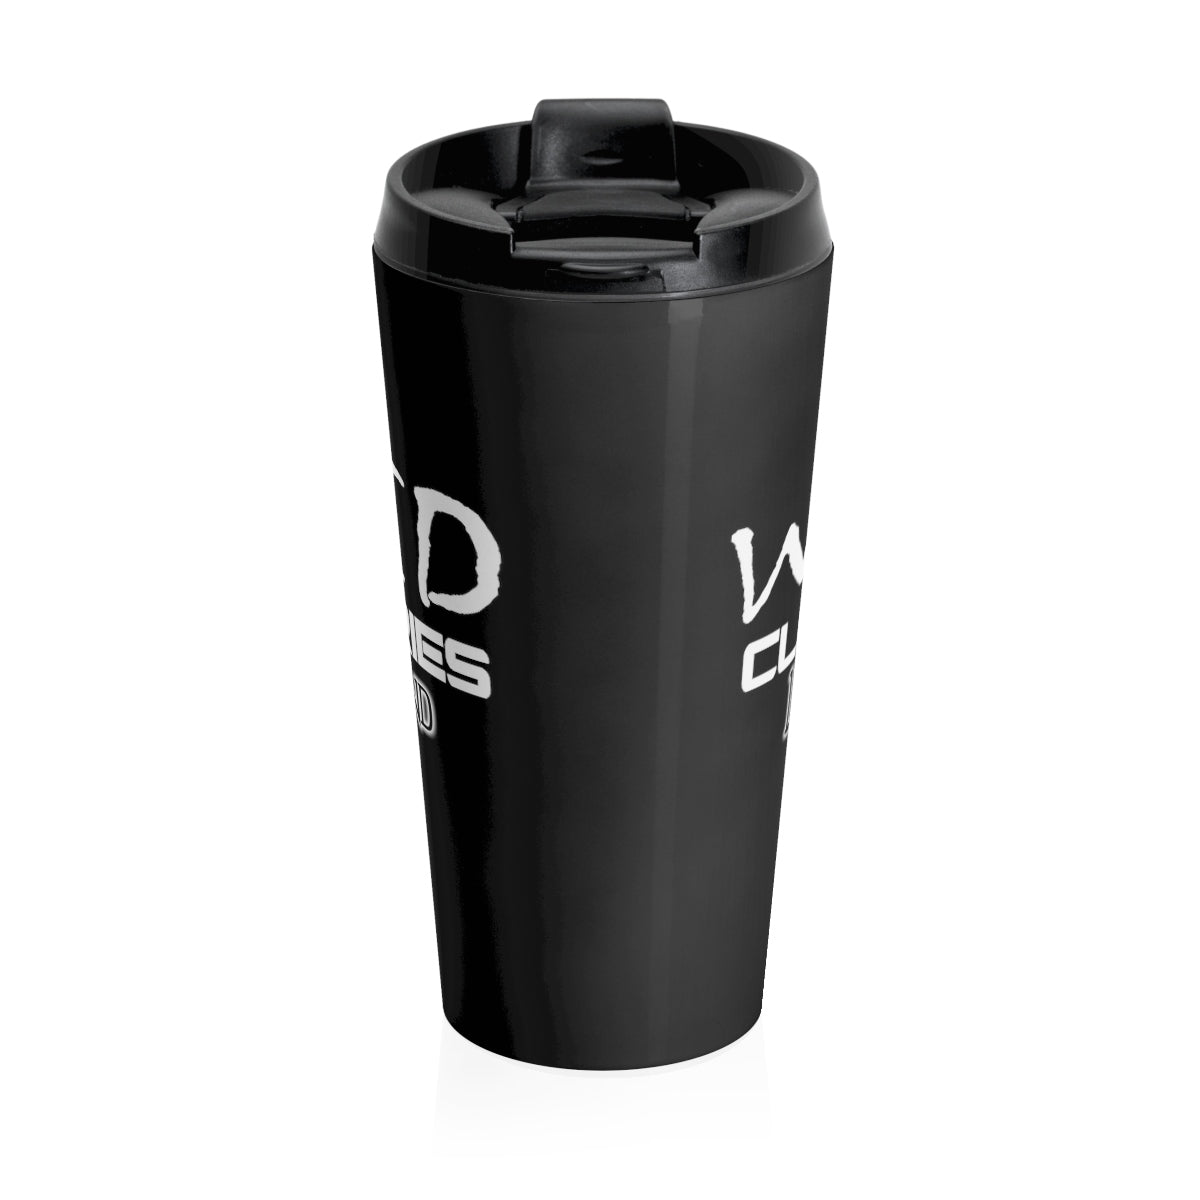 Leave It All Behind/ Stainless Steel Travel Mug